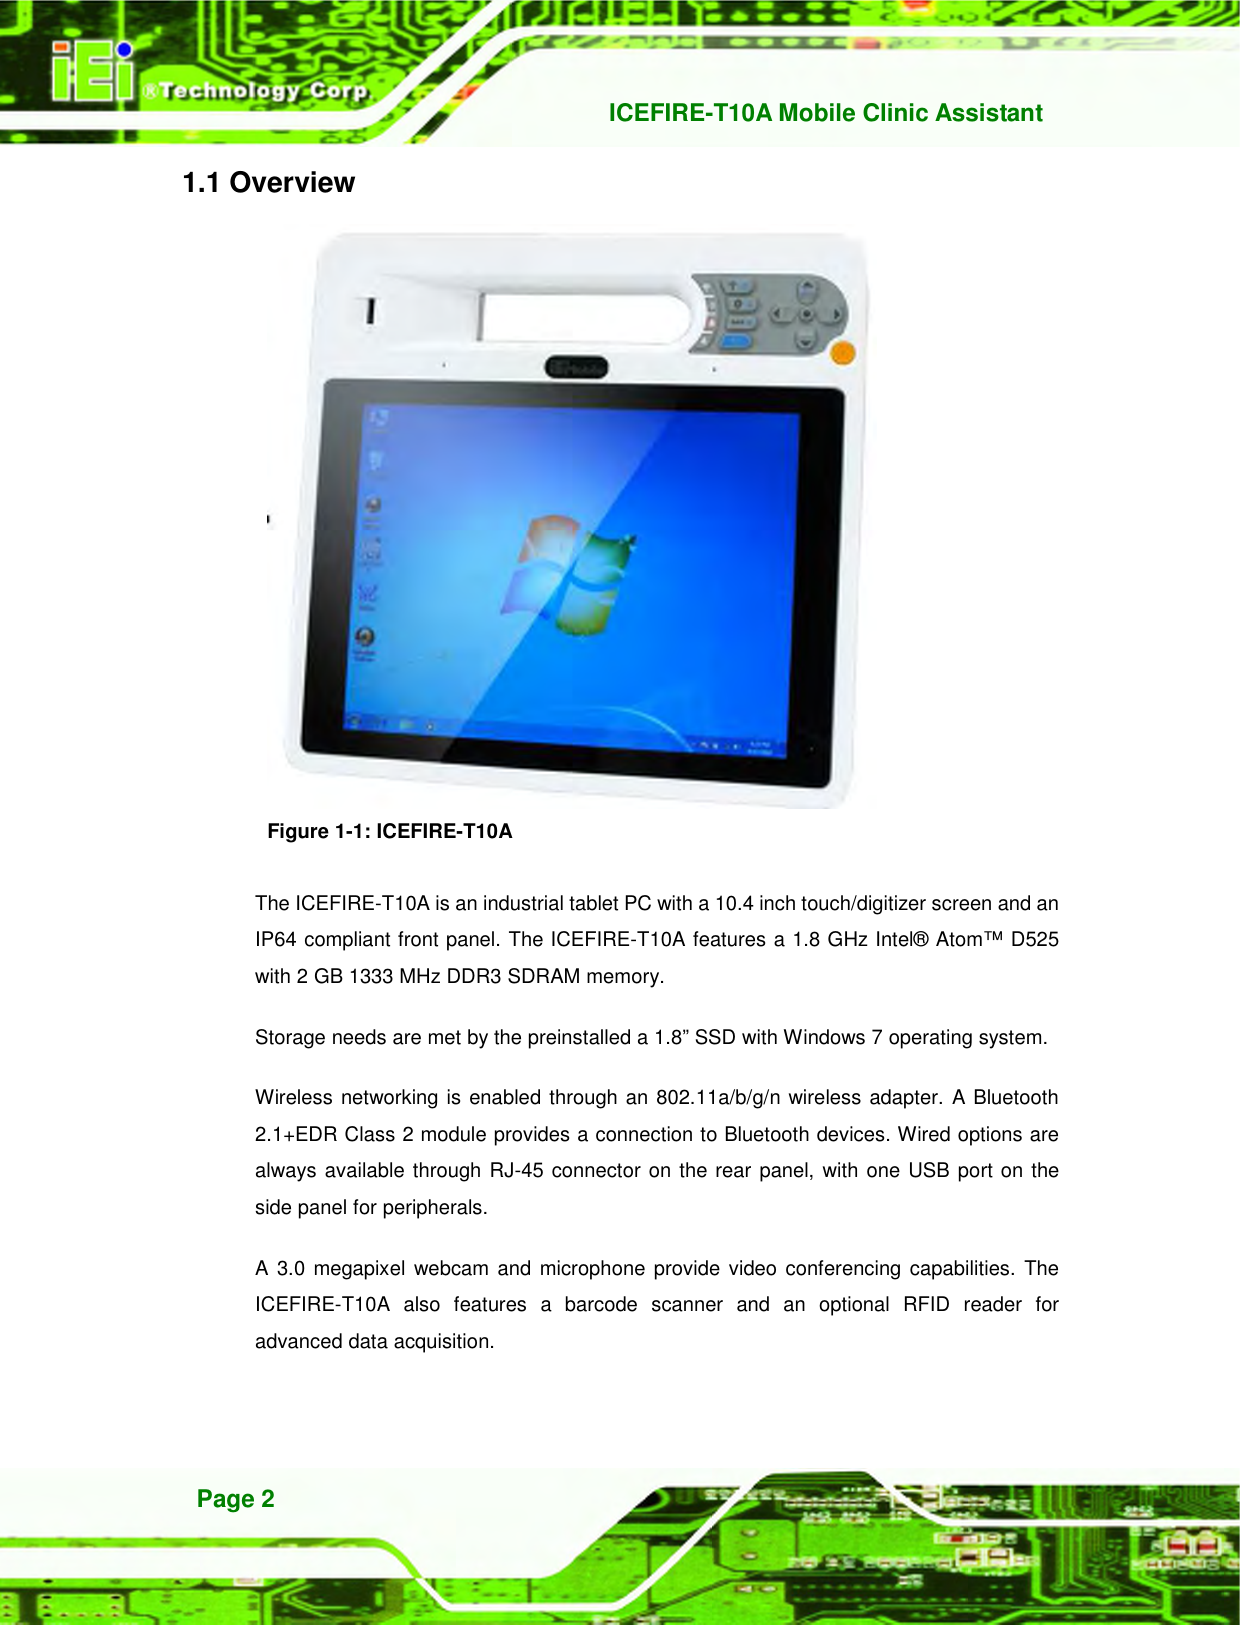   ICEFIRE-T10A Mobile Clinic Assistant Page 2 1.1 Overview  Figure 1-1: ICEFIRE-T10A  The ICEFIRE-T10A is an industrial tablet PC with a 10.4 inch touch/digitizer screen and an IP64 compliant front panel. The ICEFIRE-T10A features a 1.8 GHz Intel® Atom™ D525 with 2 GB 1333 MHz DDR3 SDRAM memory. Storage needs are met by the preinstalled a 1.8” SSD with Windows 7 operating system.   Wireless networking is enabled through an 802.11a/b/g/n wireless adapter. A Bluetooth 2.1+EDR Class 2 module provides a connection to Bluetooth devices. Wired options are always available through RJ-45 connector on the rear panel, with one USB port on the side panel for peripherals. A 3.0 megapixel  webcam  and microphone provide video conferencing capabilities. The ICEFIRE-T10A  also  features  a  barcode  scanner  and  an  optional  RFID  reader  for advanced data acquisition.   